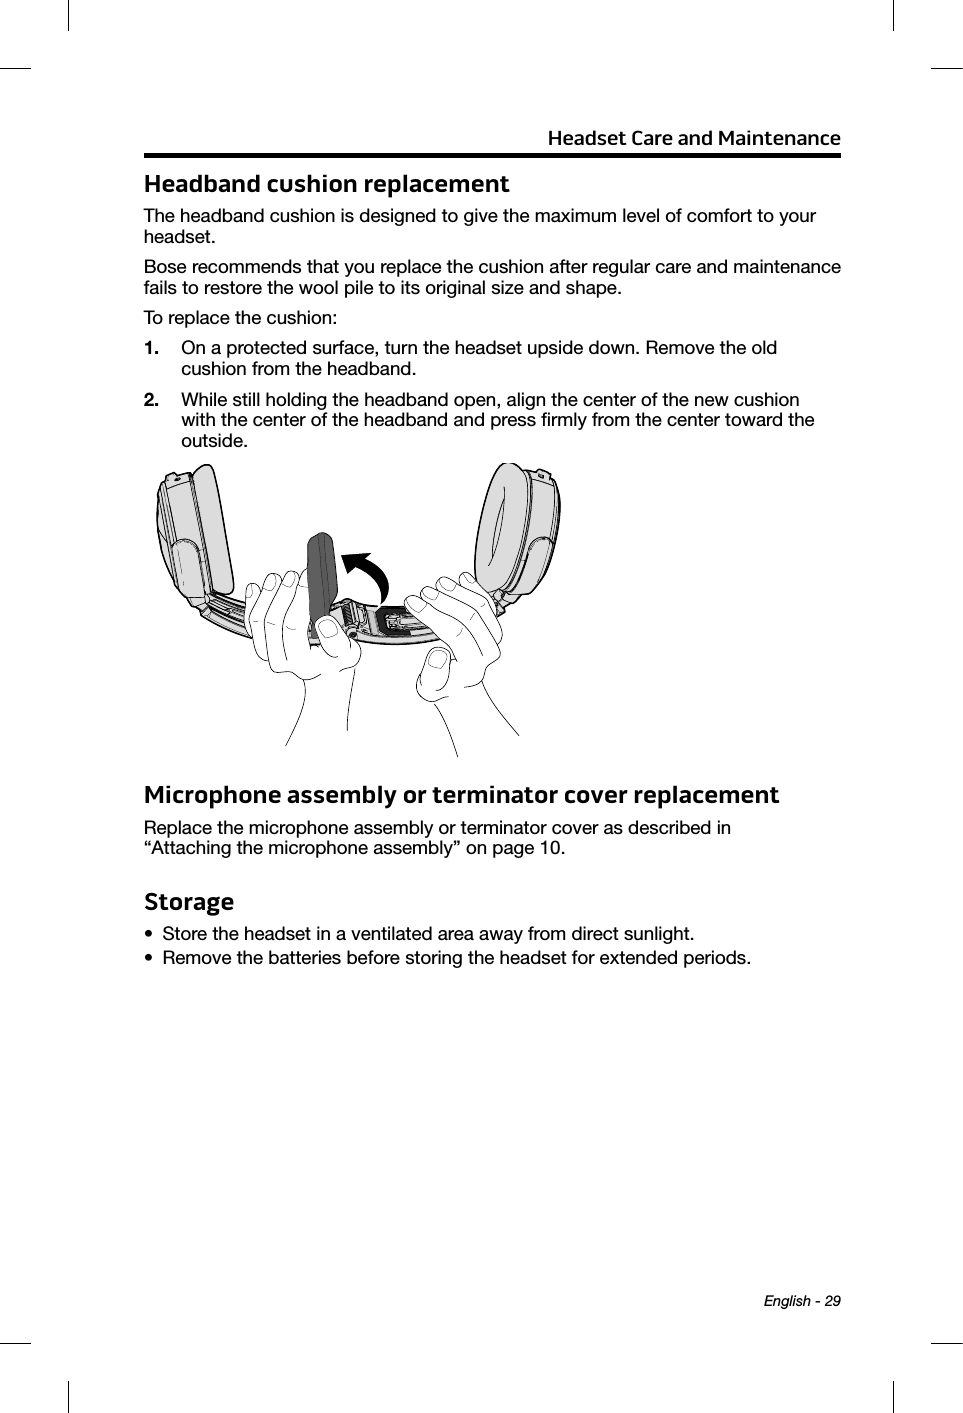 Headset Care and Maintenance English - 29Headband cushion replacementThe headband cushion is designed to give the maximum level of comfort to your headset. Bose recommends that you replace the cushion after regular care and maintenance fails to restore the wool pile to its original size and shape.To replace the cushion: 1.  On a protected surface, turn the headset upside down. Remove the old  cushion from the headband.2.  While still holding the headband open, align the center of the new cushion with the center of the headband and press ﬁrmly from the center toward the outside. Microphone assembly or terminator cover replacementReplace the microphone assembly or terminator cover as described in  “Attaching the microphone assembly” on page 10.Storage•  Store the headset in a ventilated area away from direct sunlight. •  Remove the batteries before storing the headset for extended periods.